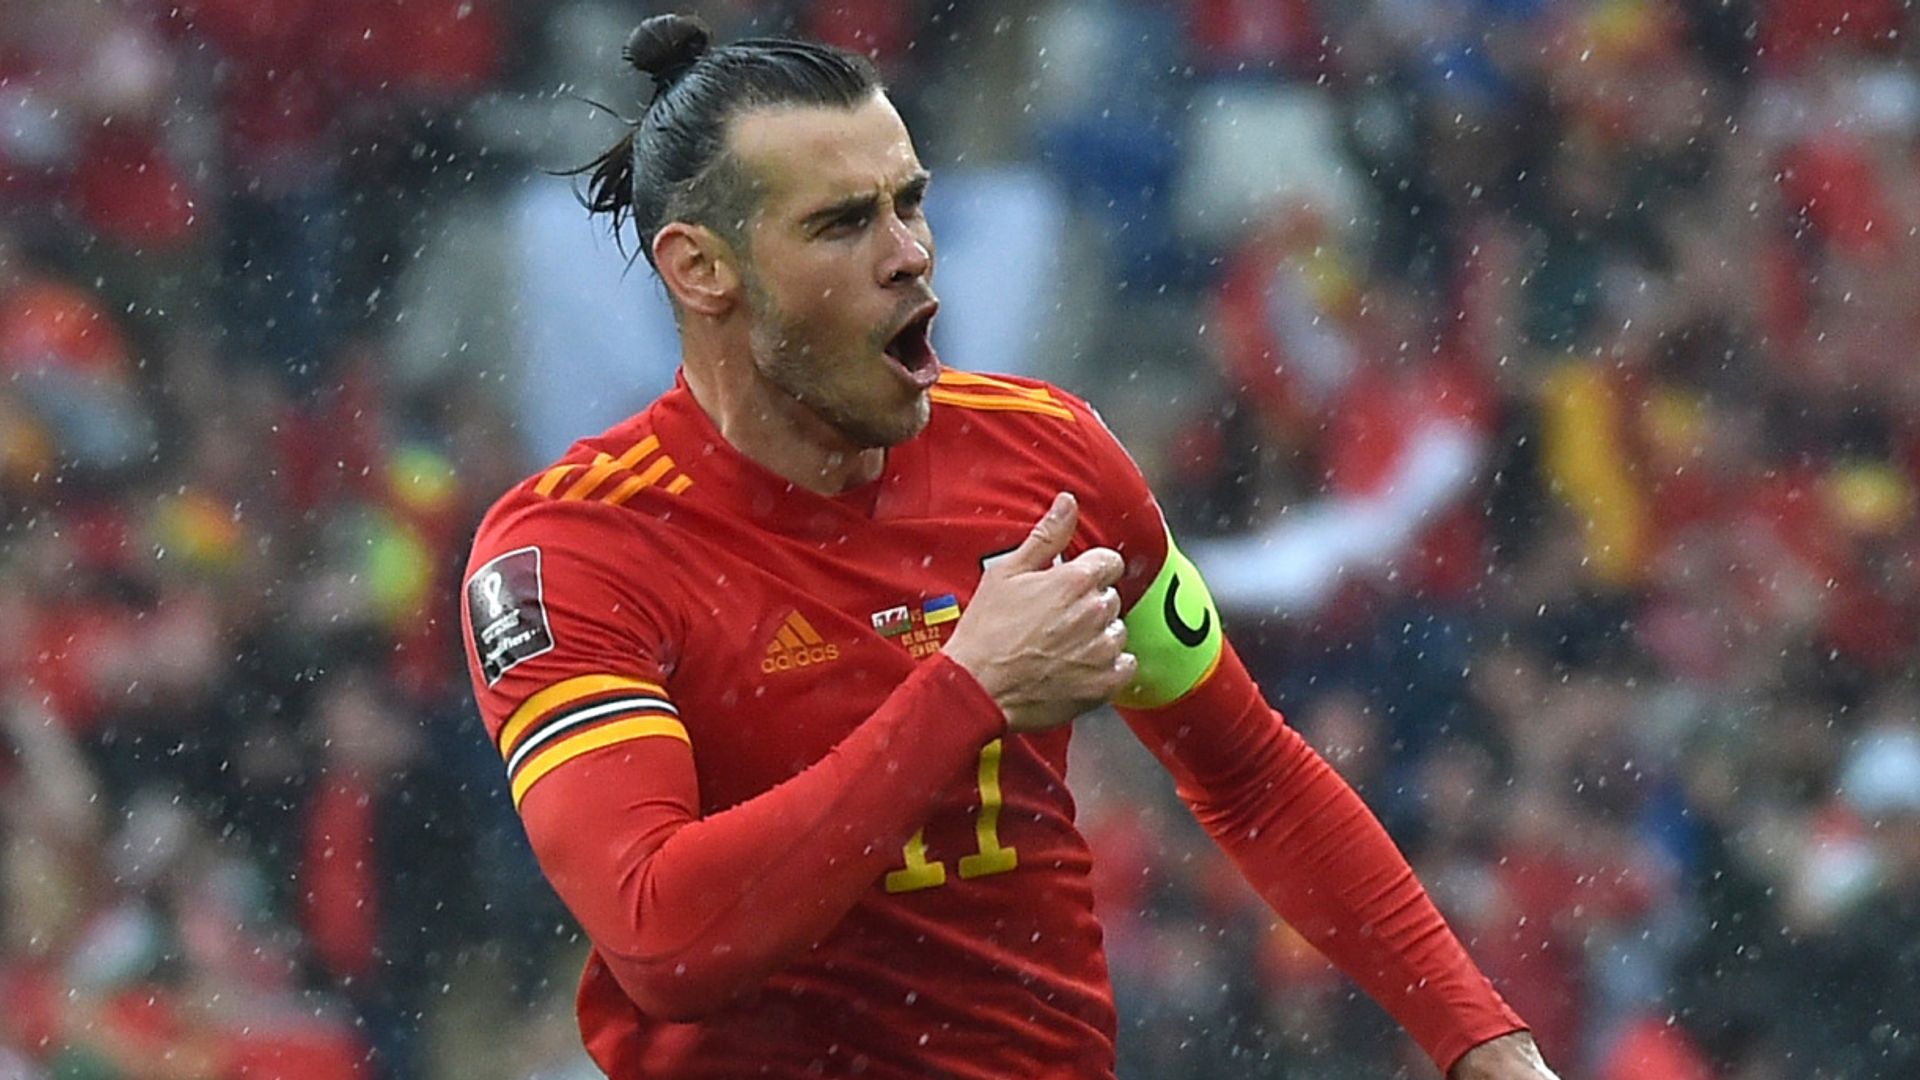 bale:-wales’-greatest-result-|-page:-that-was-for-gary-speed